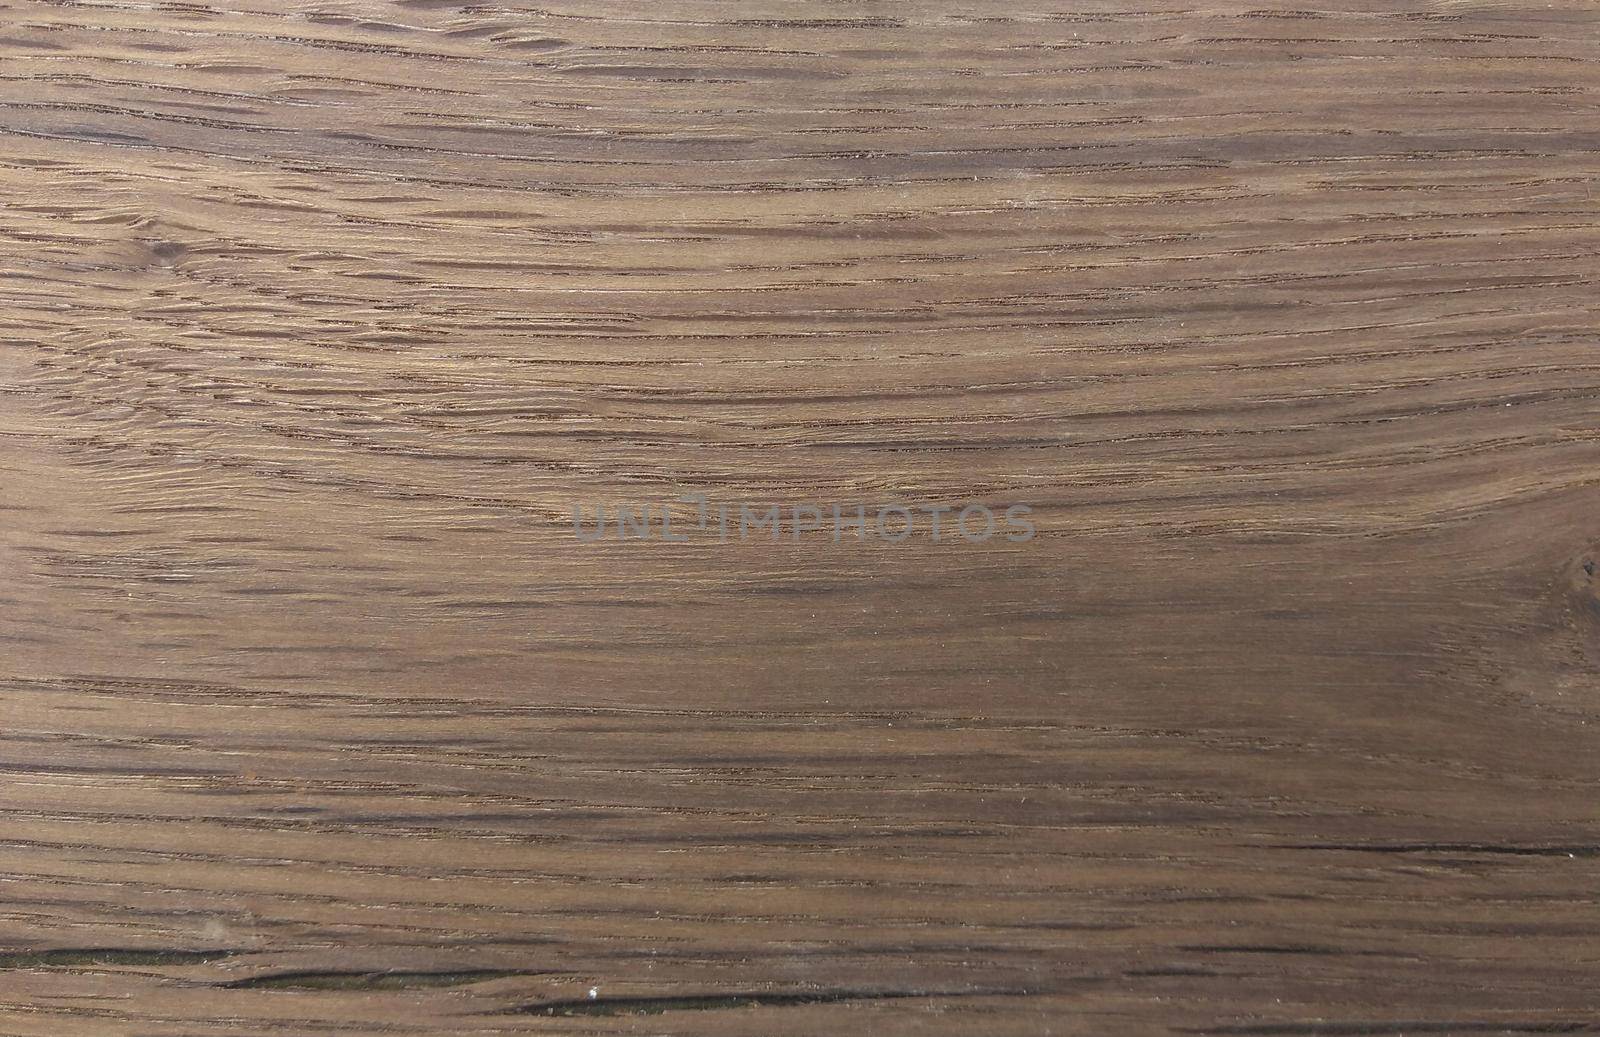 Natural Smoked knotty oak wood texture background. Smoked knotty oak veneer surface for interior and exterior manufacturers use.